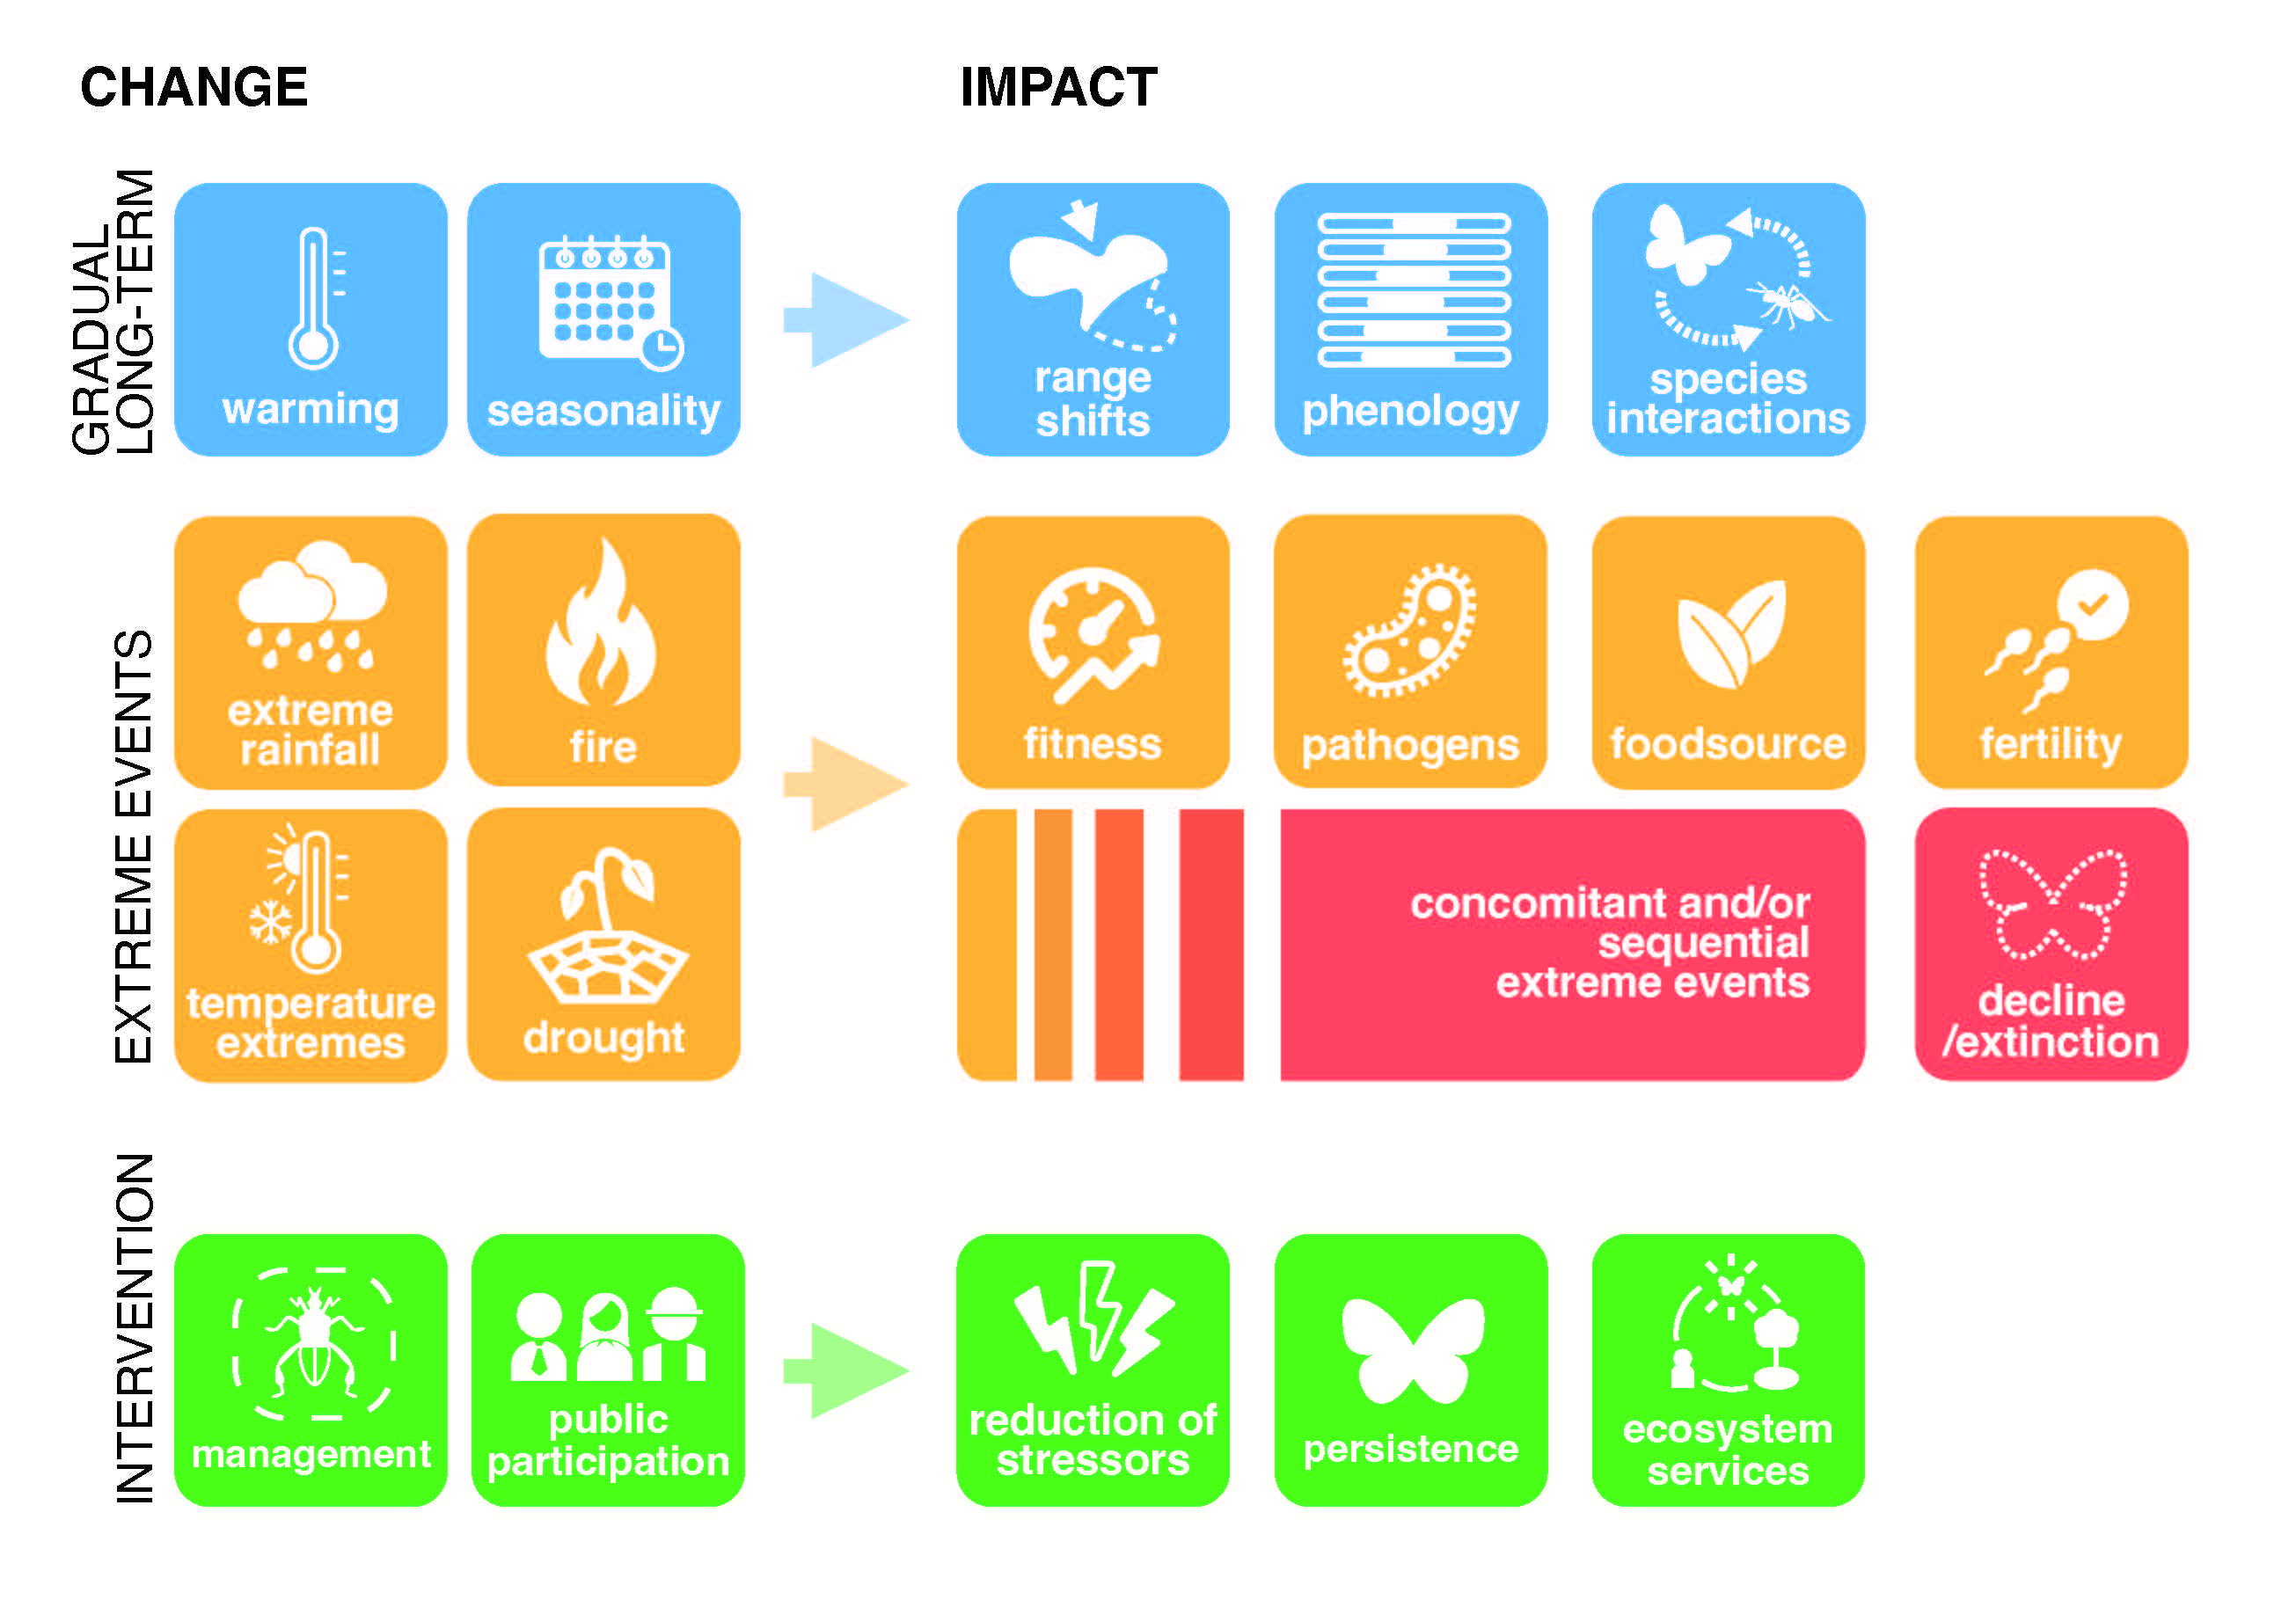 A chart outlines the changes to insect communities and their various impacts.